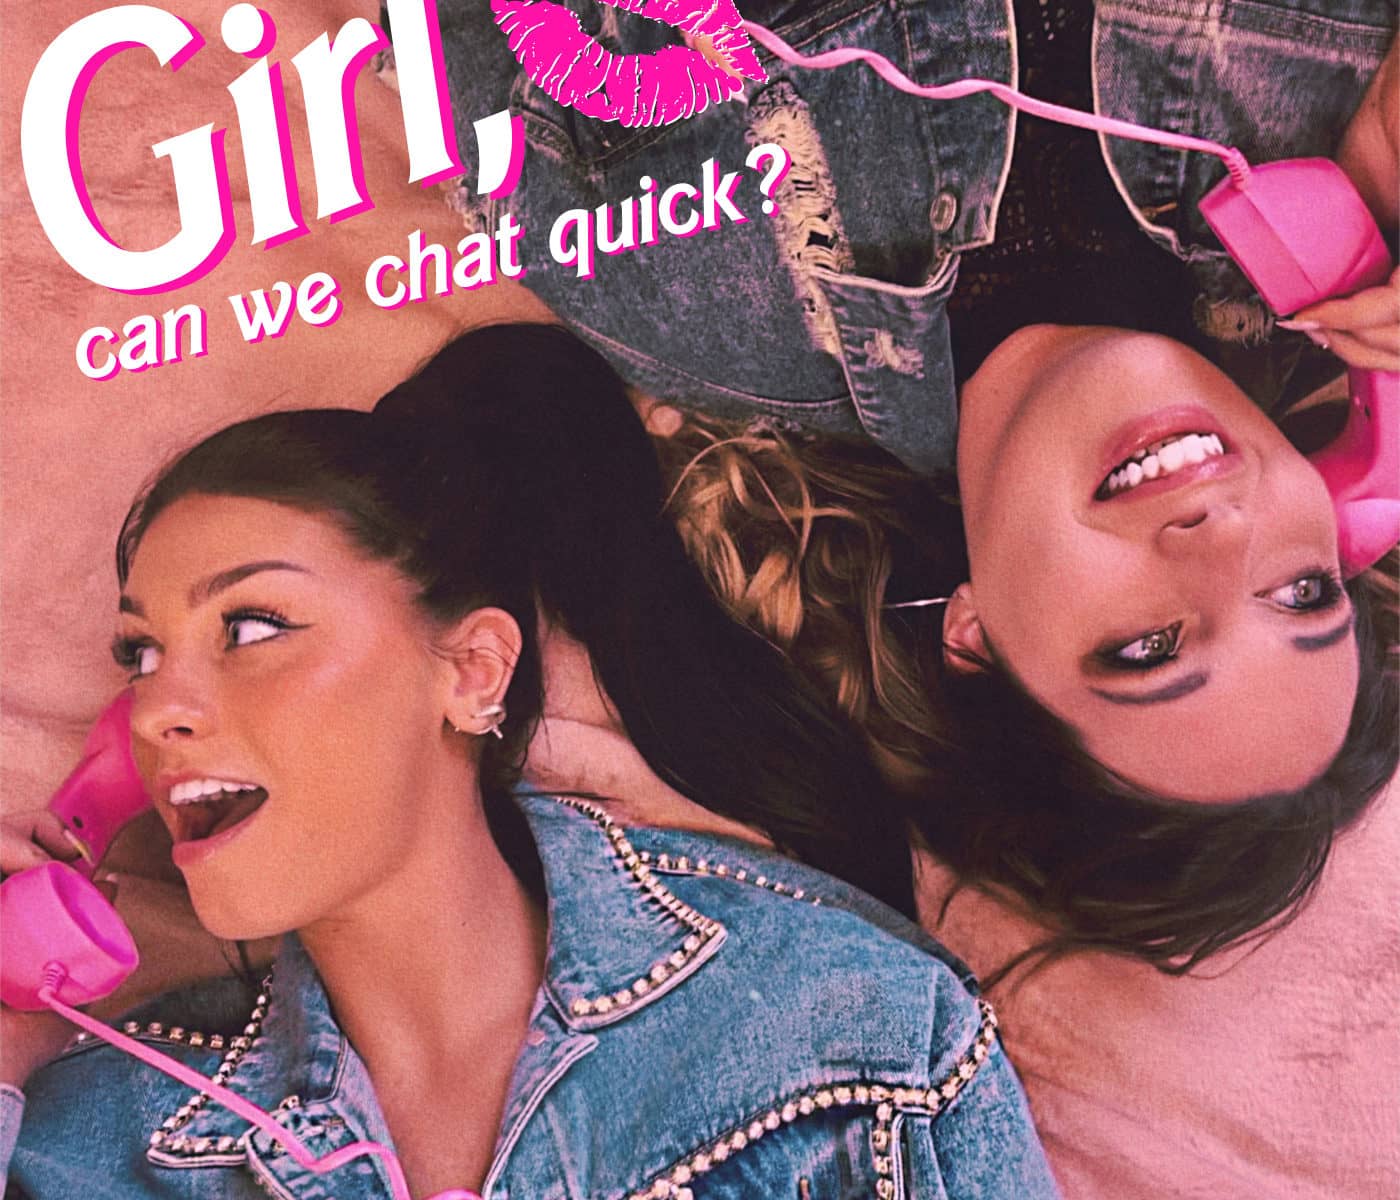 girl_can_we_chat_quick_podcast-18